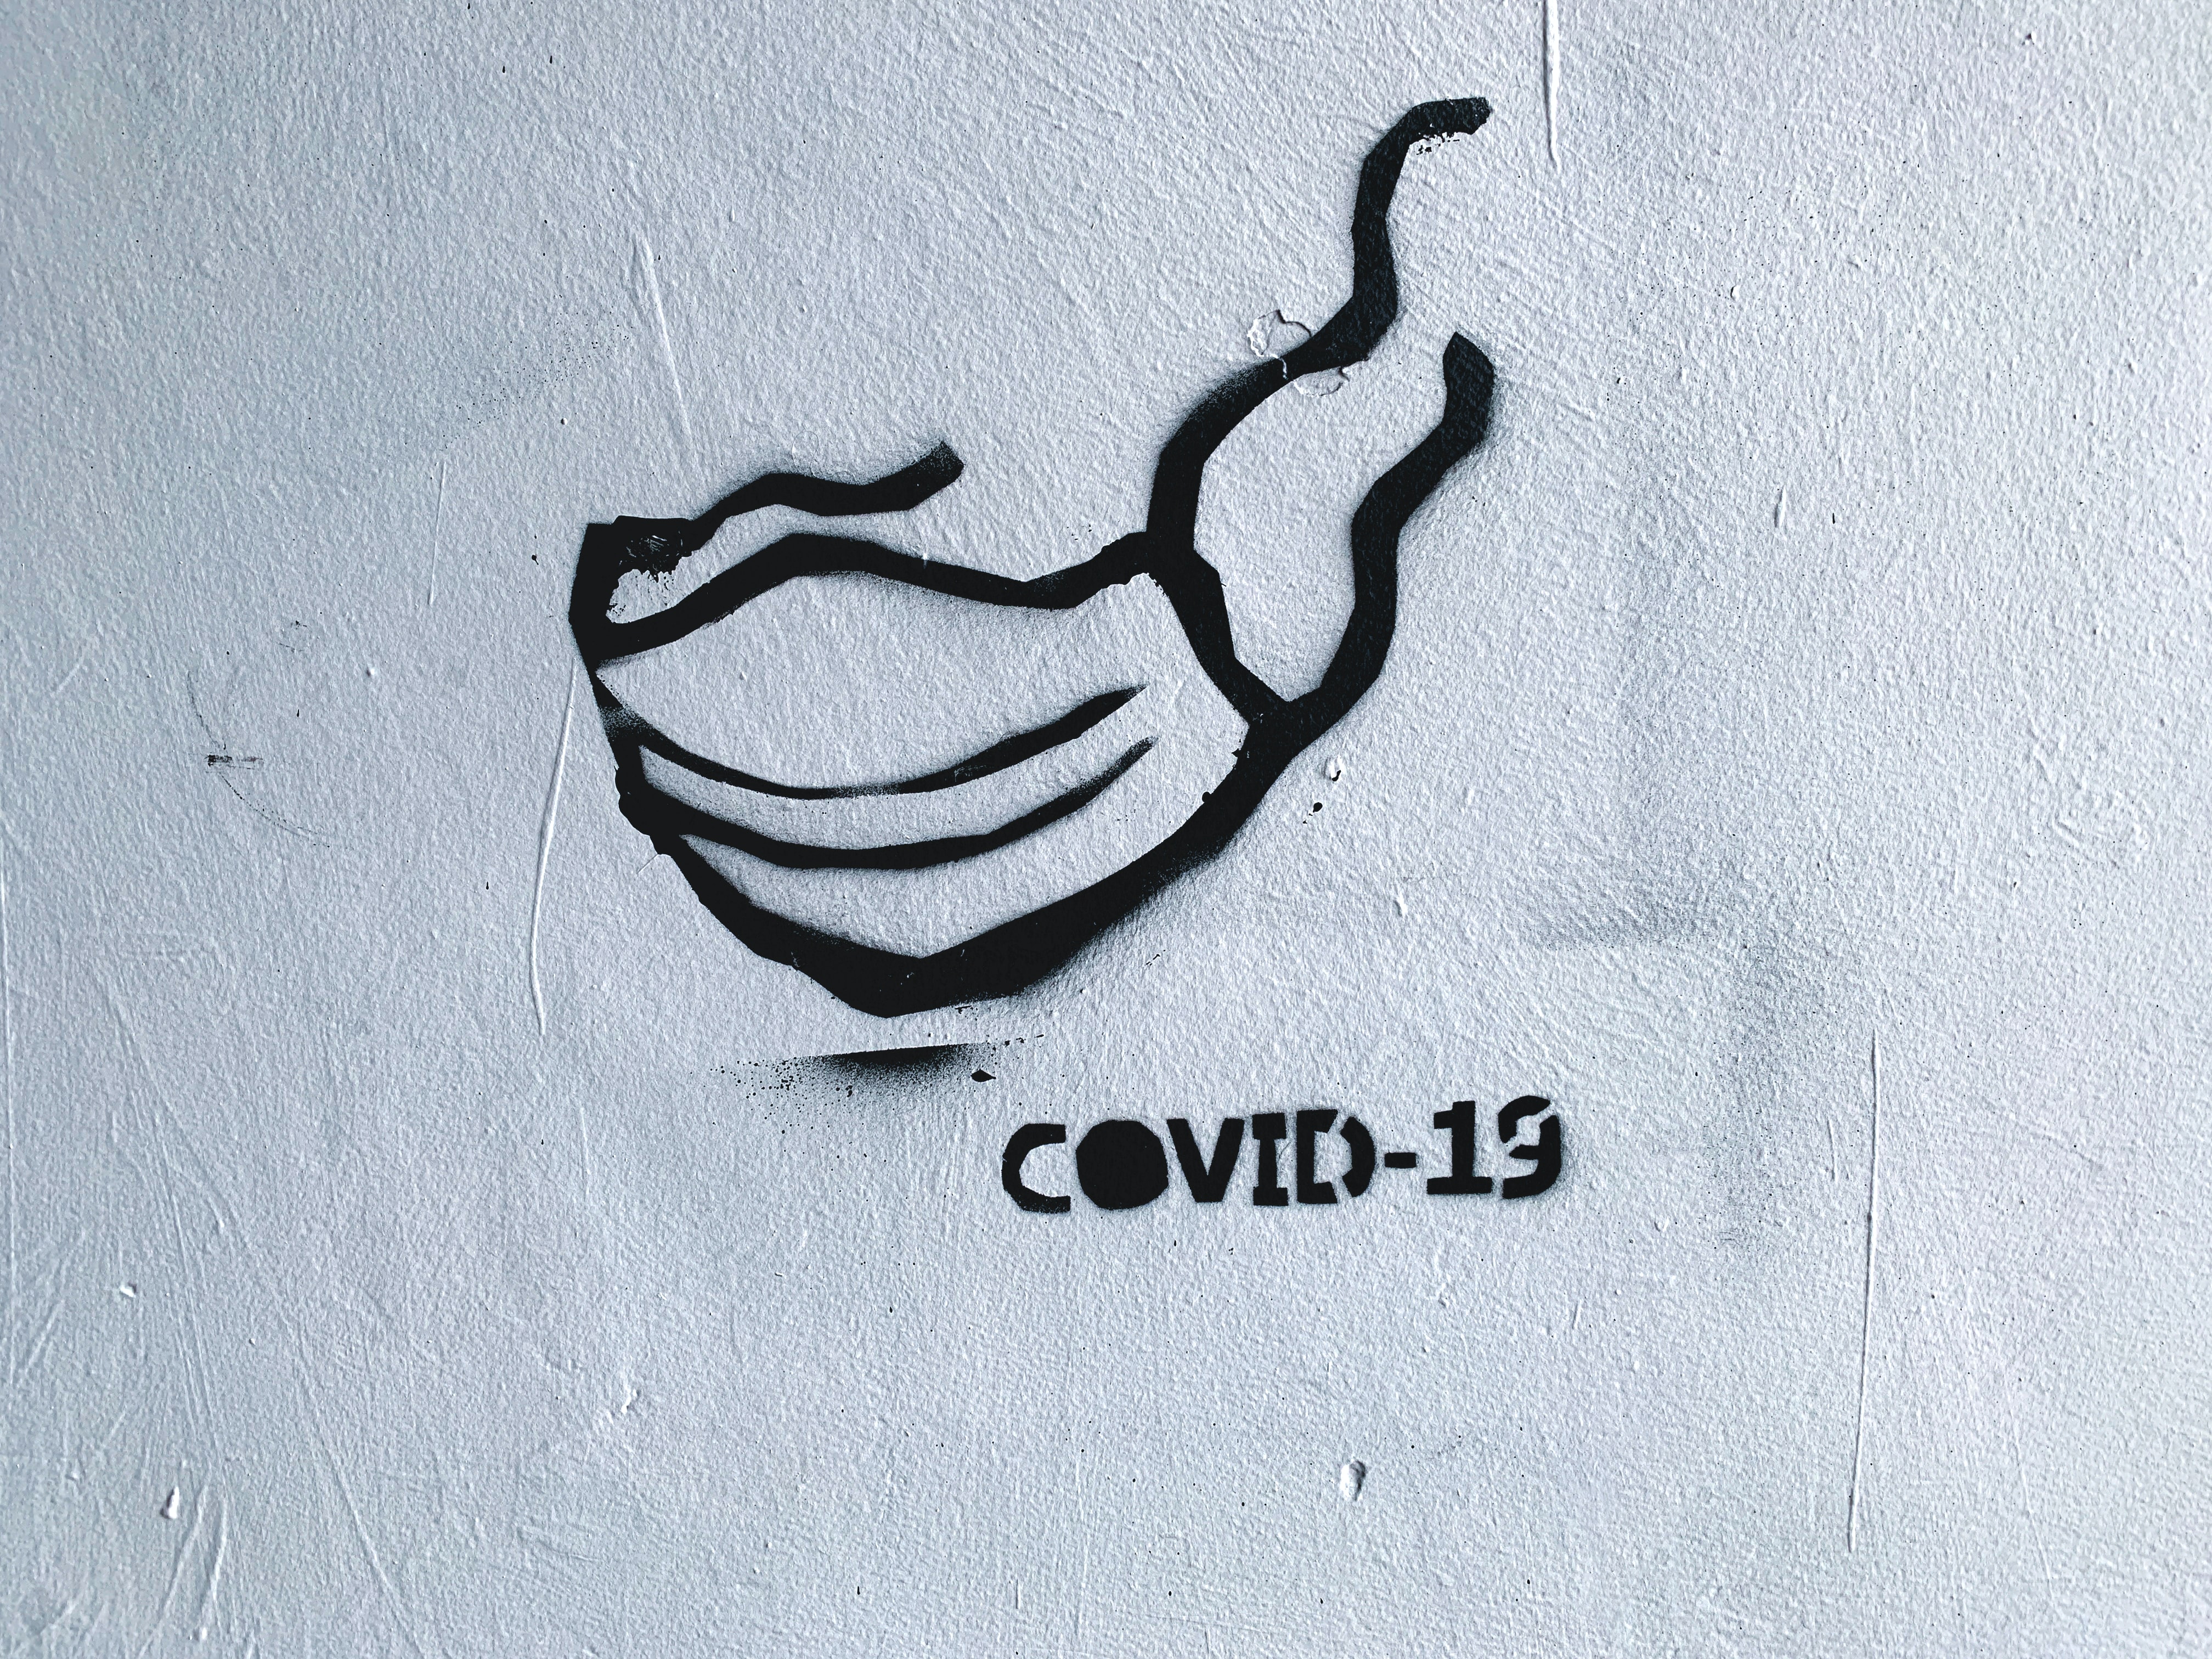 graffiti of mask with word covid-19